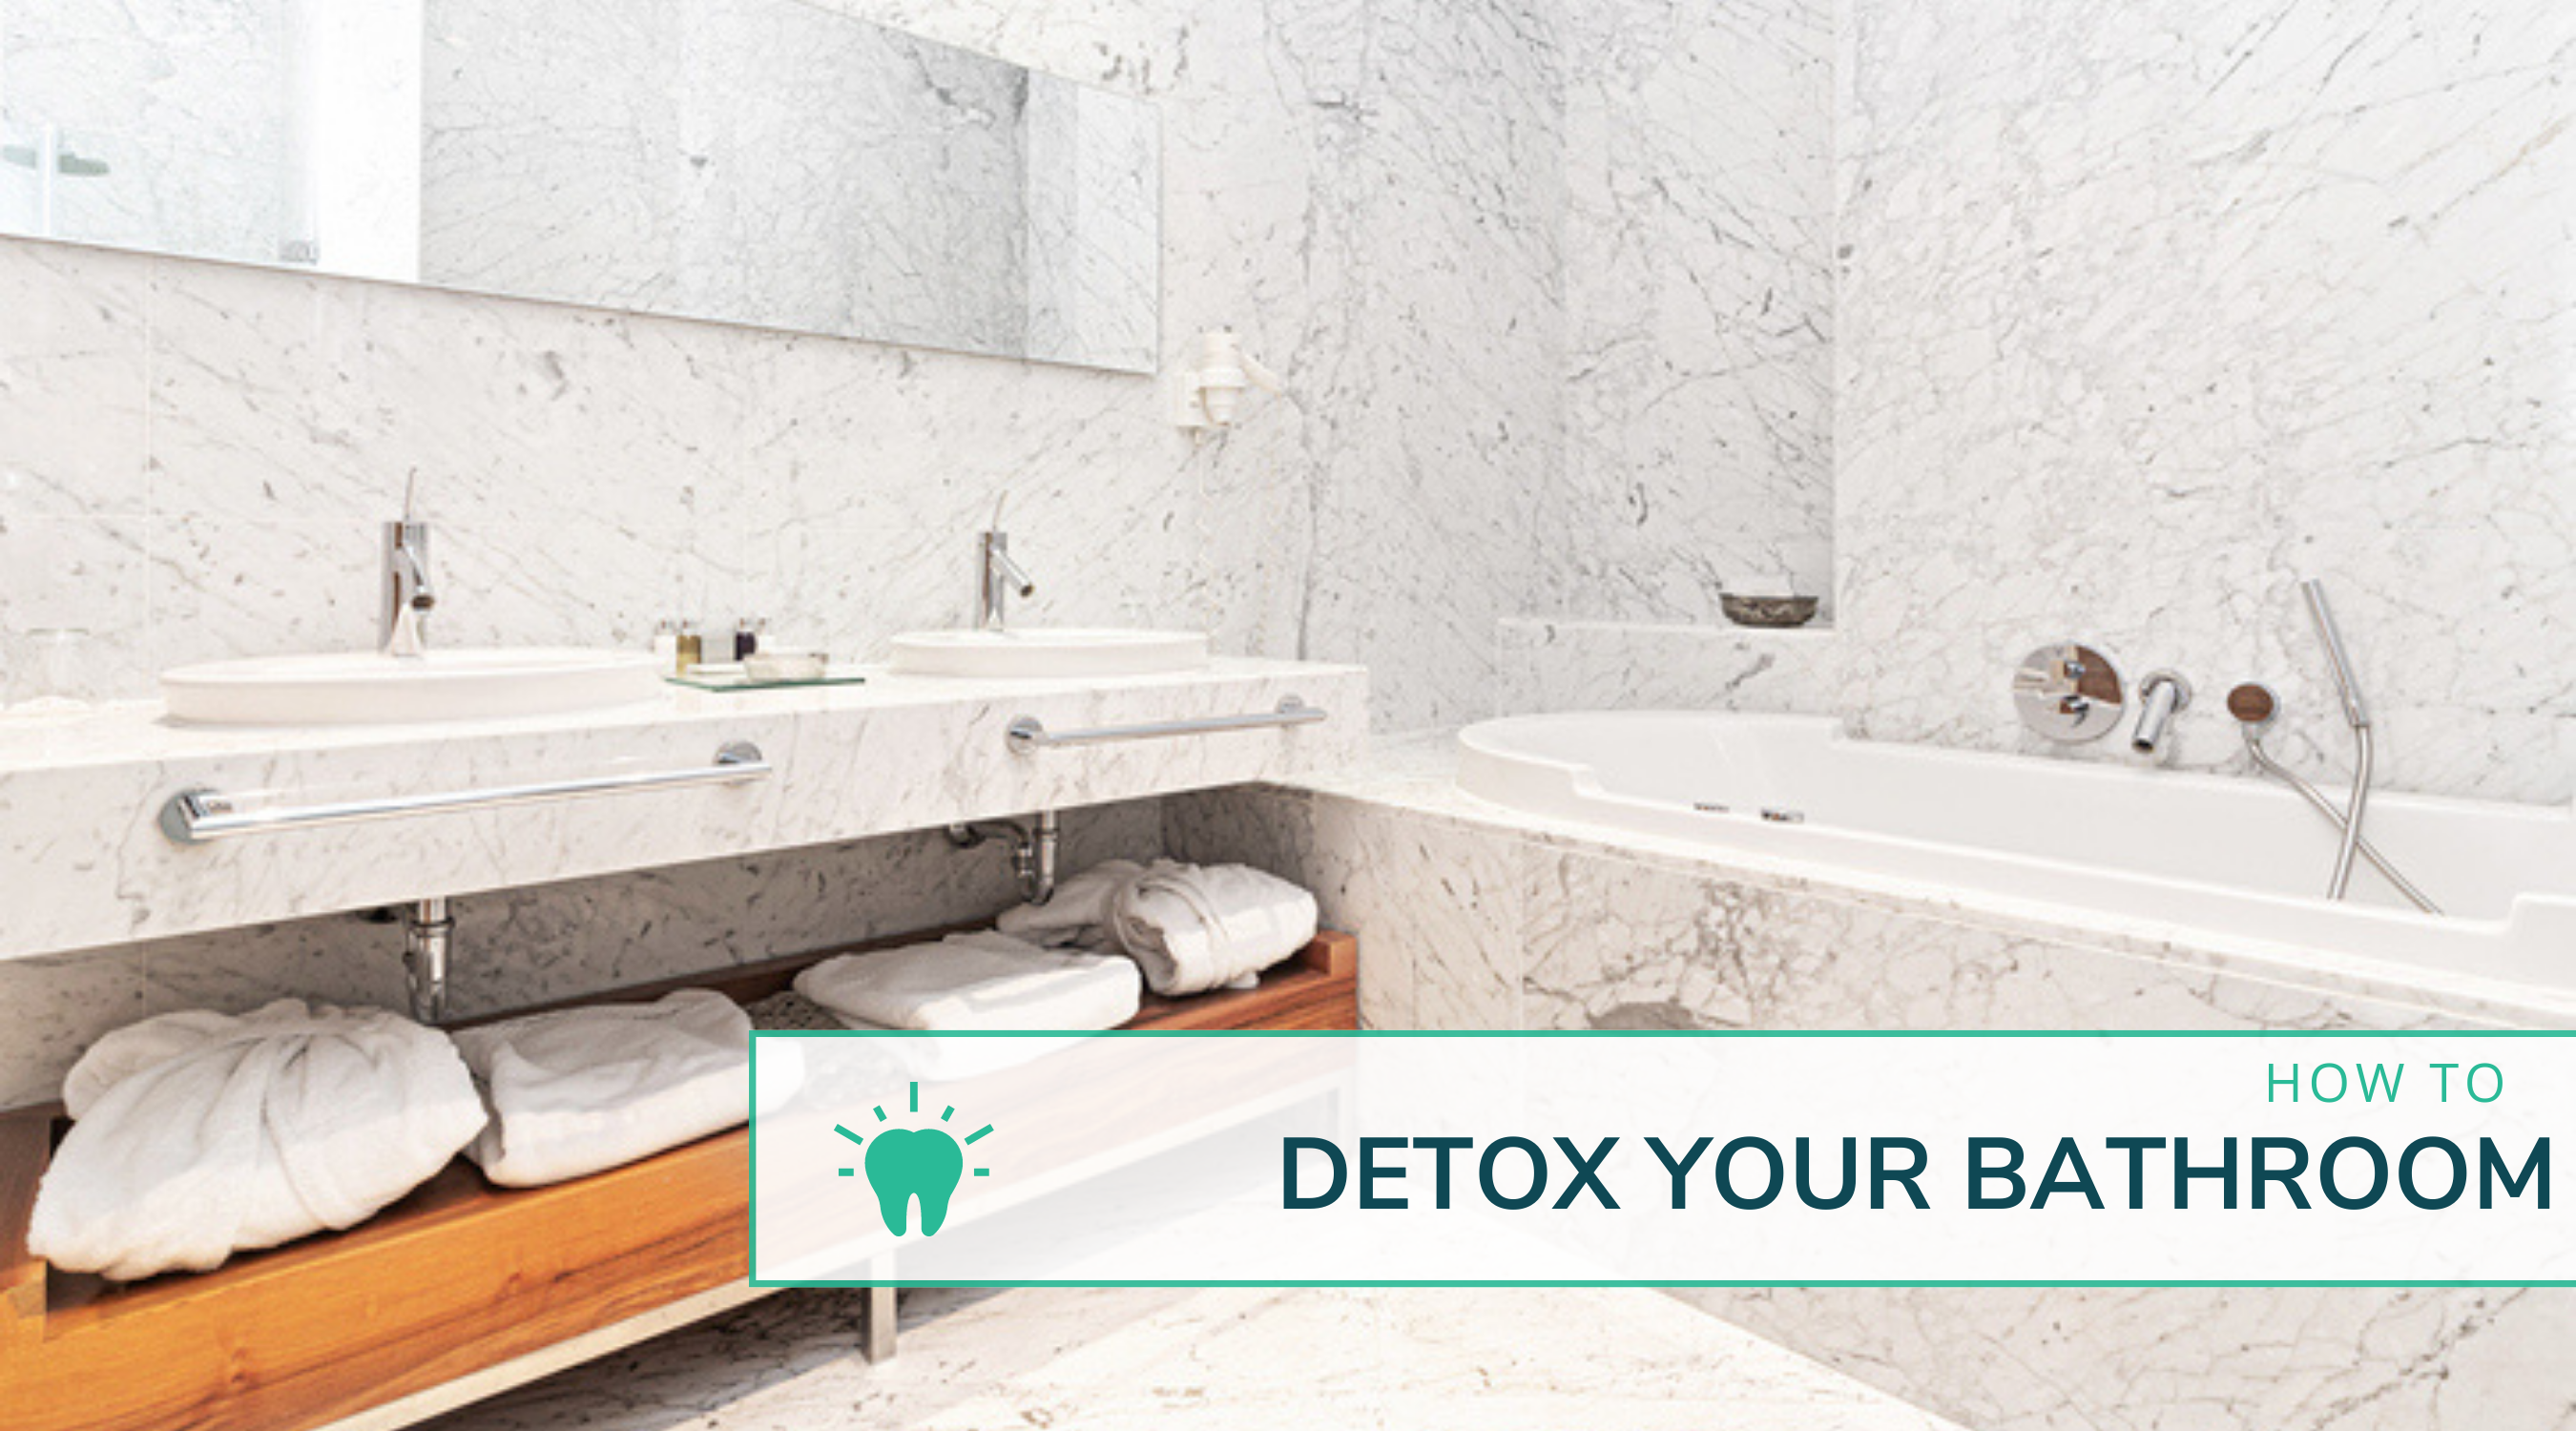 How To Detox Your Bathroom